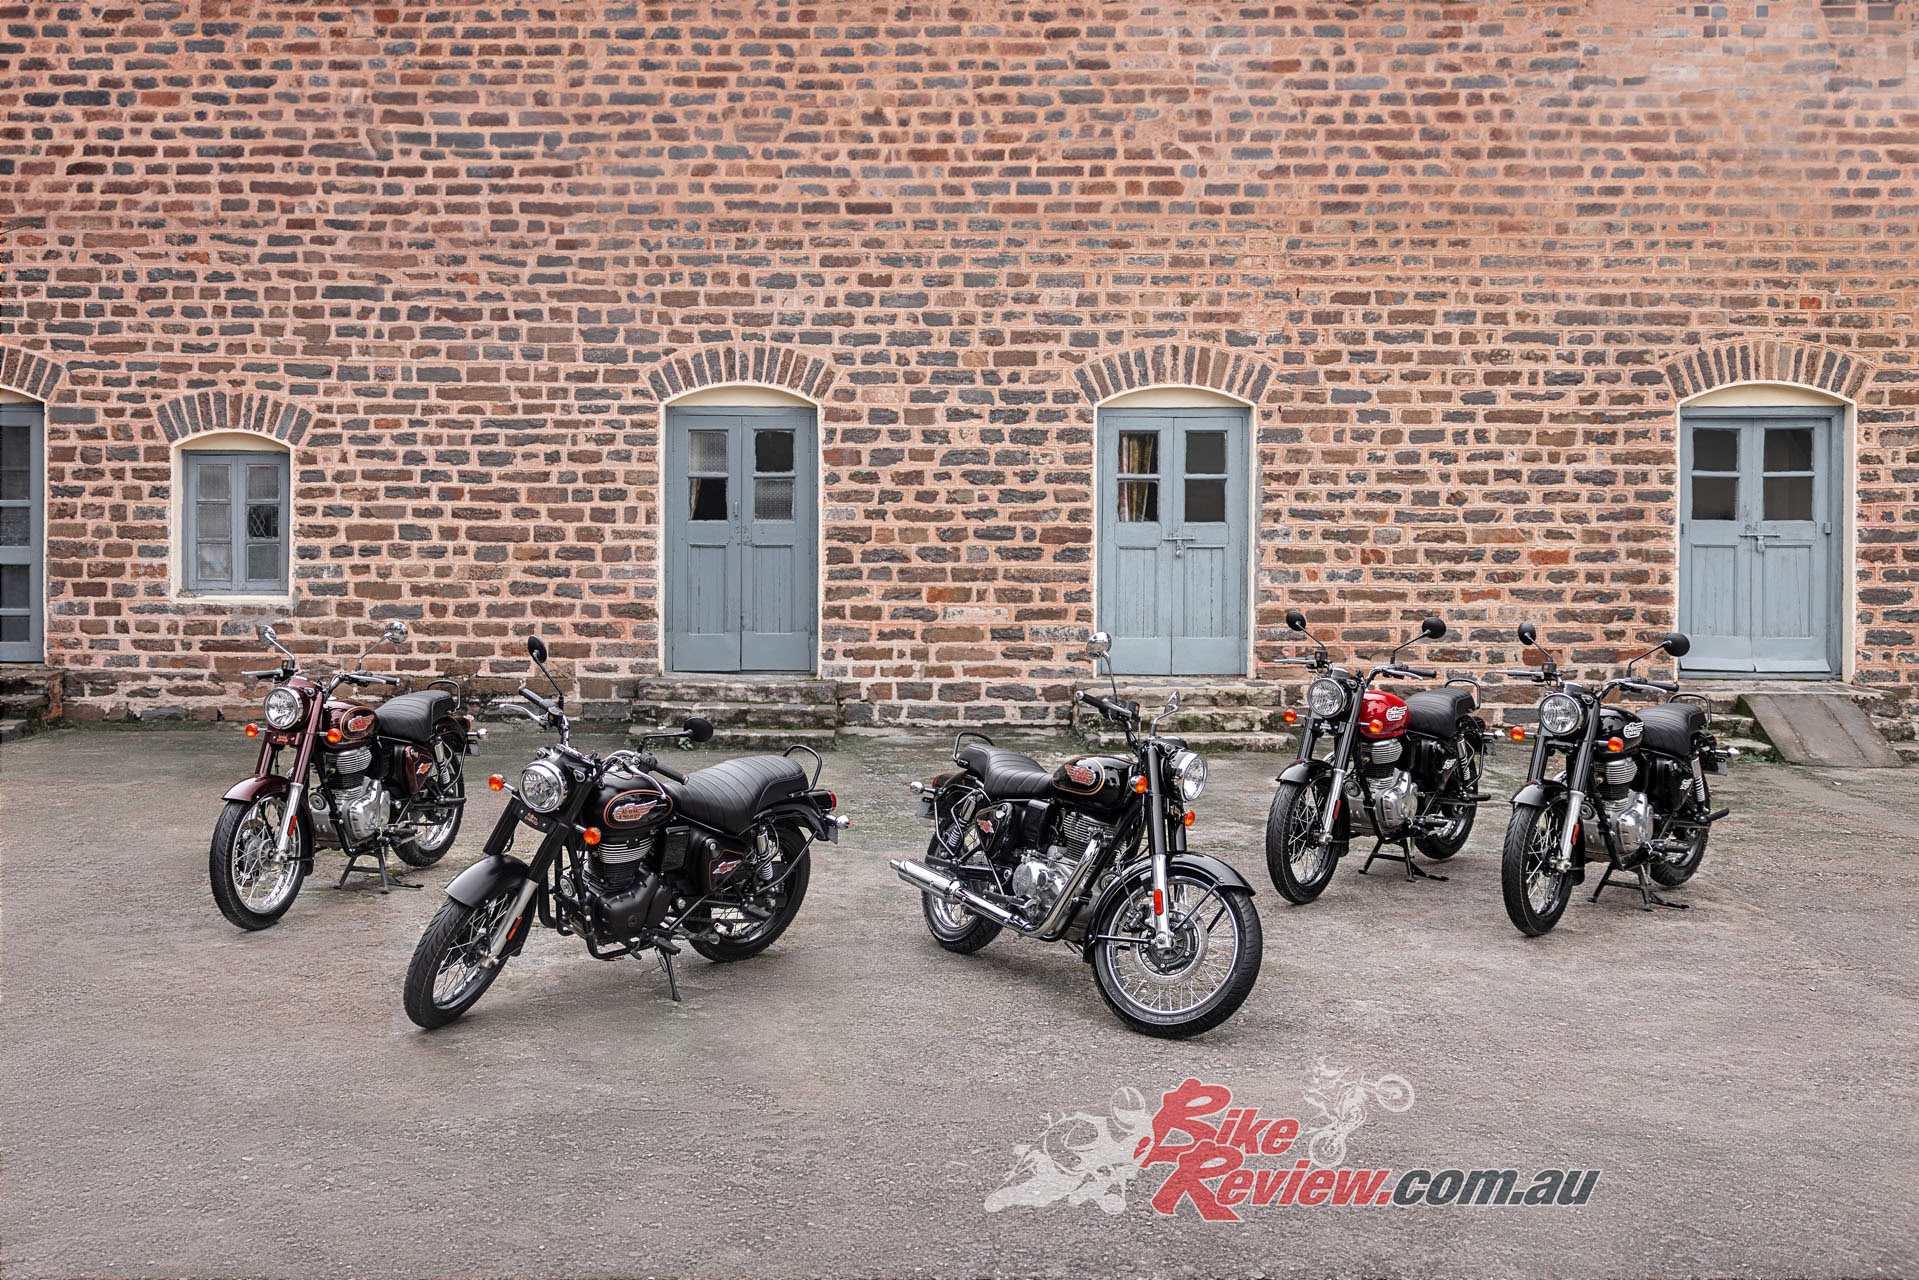 The Australian colours, variants, arrival and pricing of the Royal Enfield Bullet 350 is yet to be released.